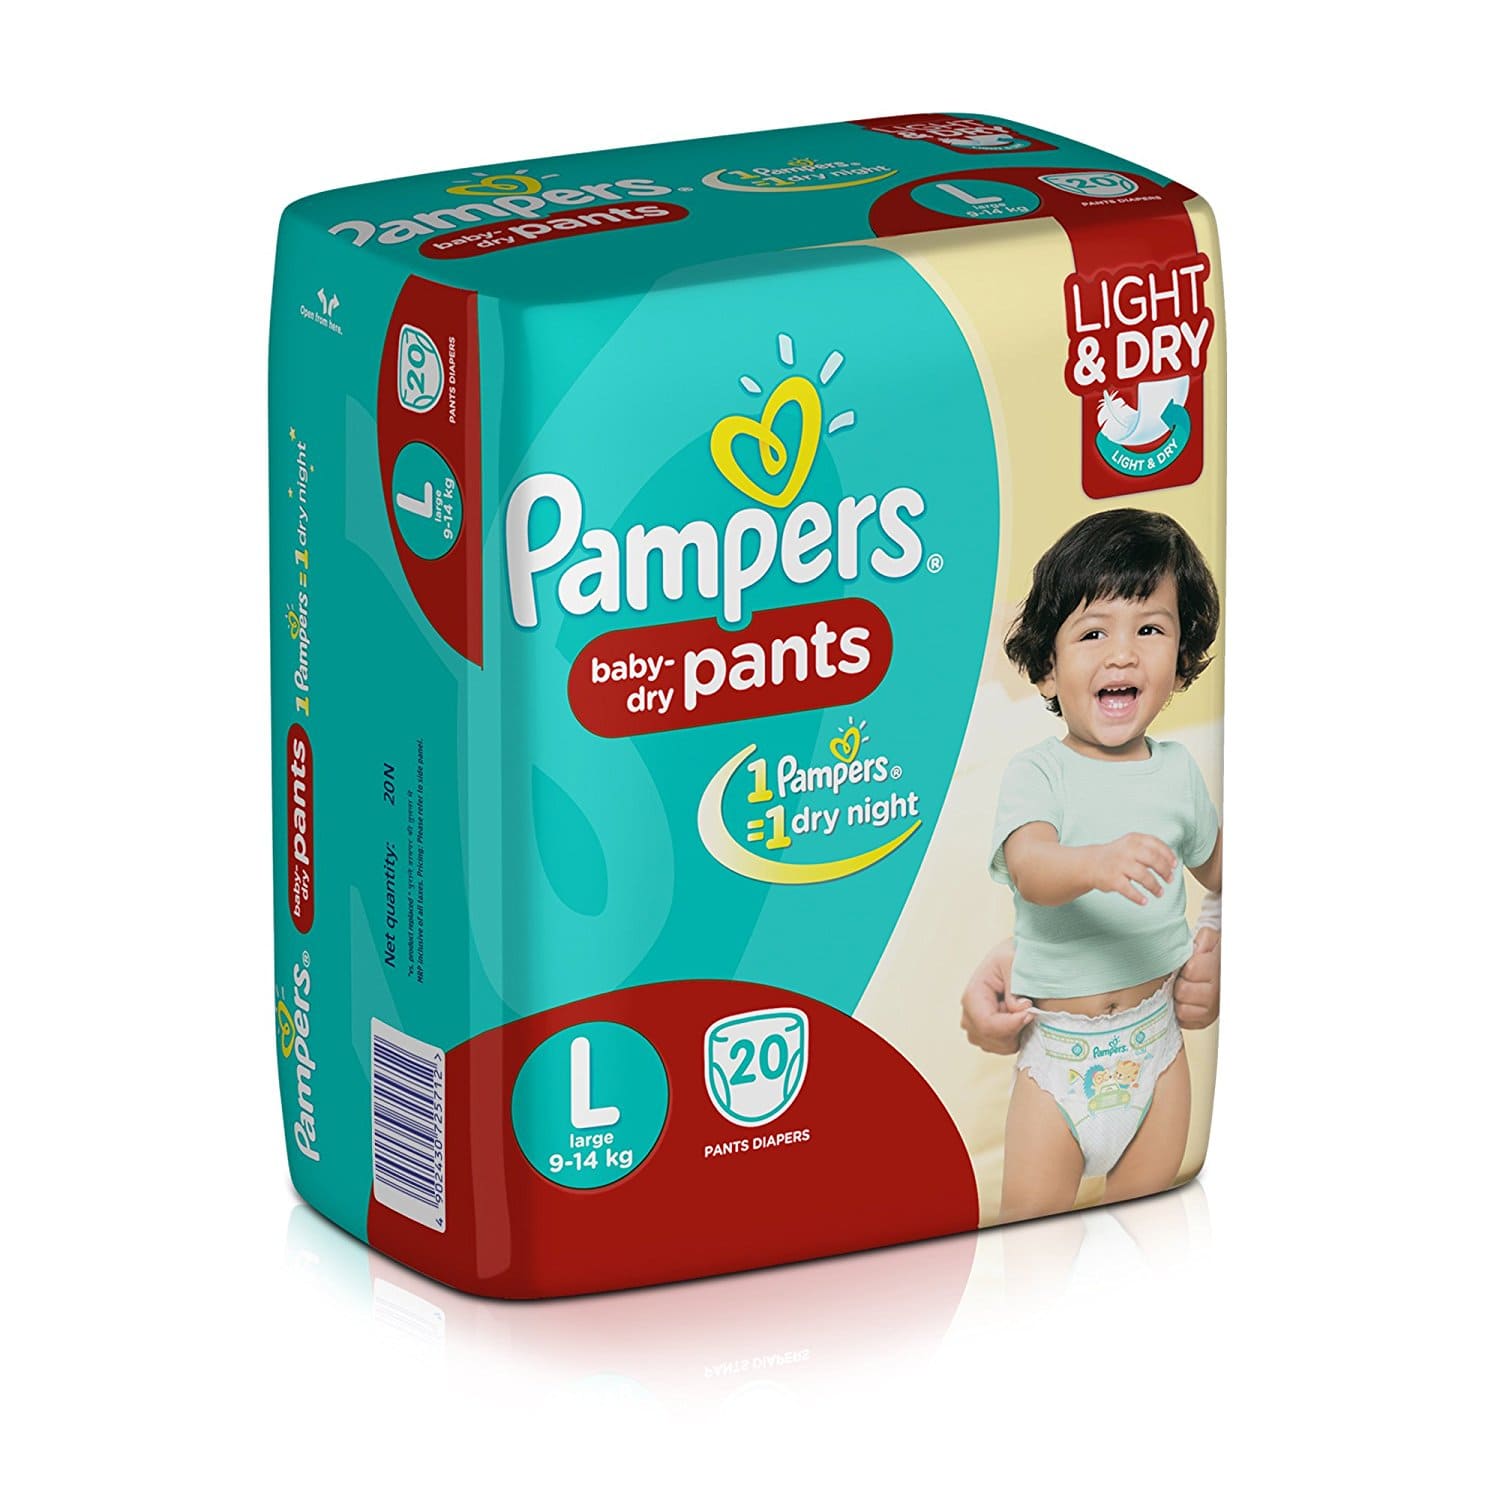 Pampers Large Size Diapers (20 Count)